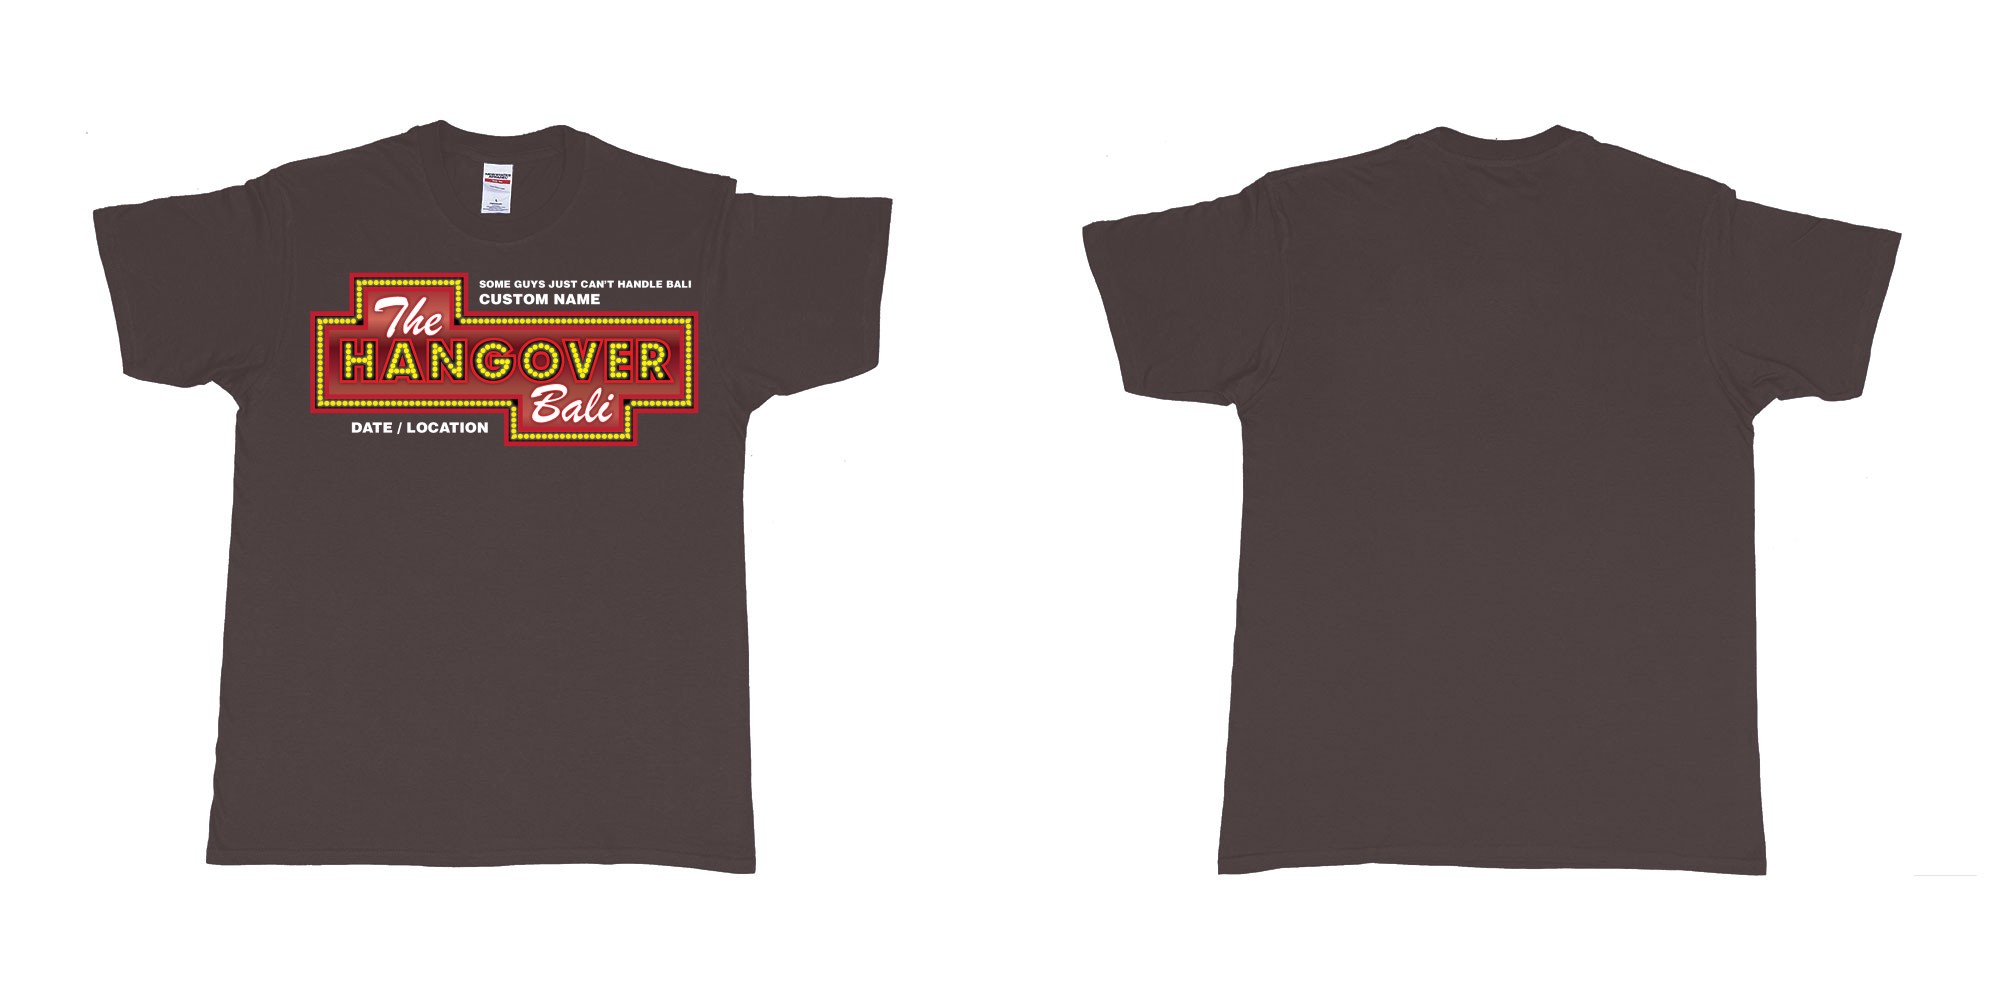 Custom tshirt design the hangover bali tour custom printing own name in fabric color dark-chocolate choice your own text made in Bali by The Pirate Way